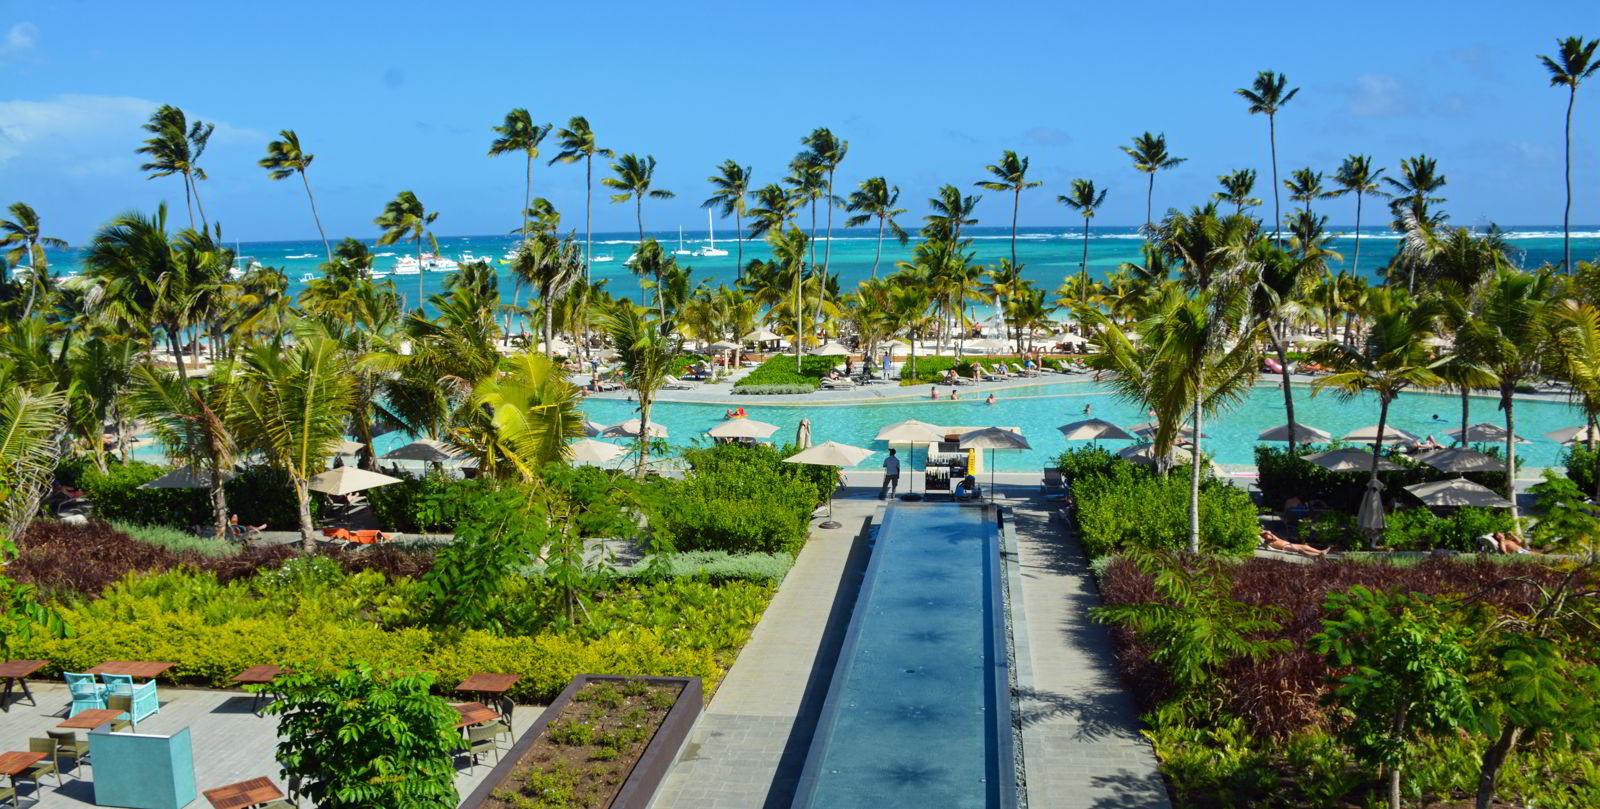 An image of Lopesan Costa Bavaro Resort in Punta Cana taken from above the main pool looking out to the ocean.